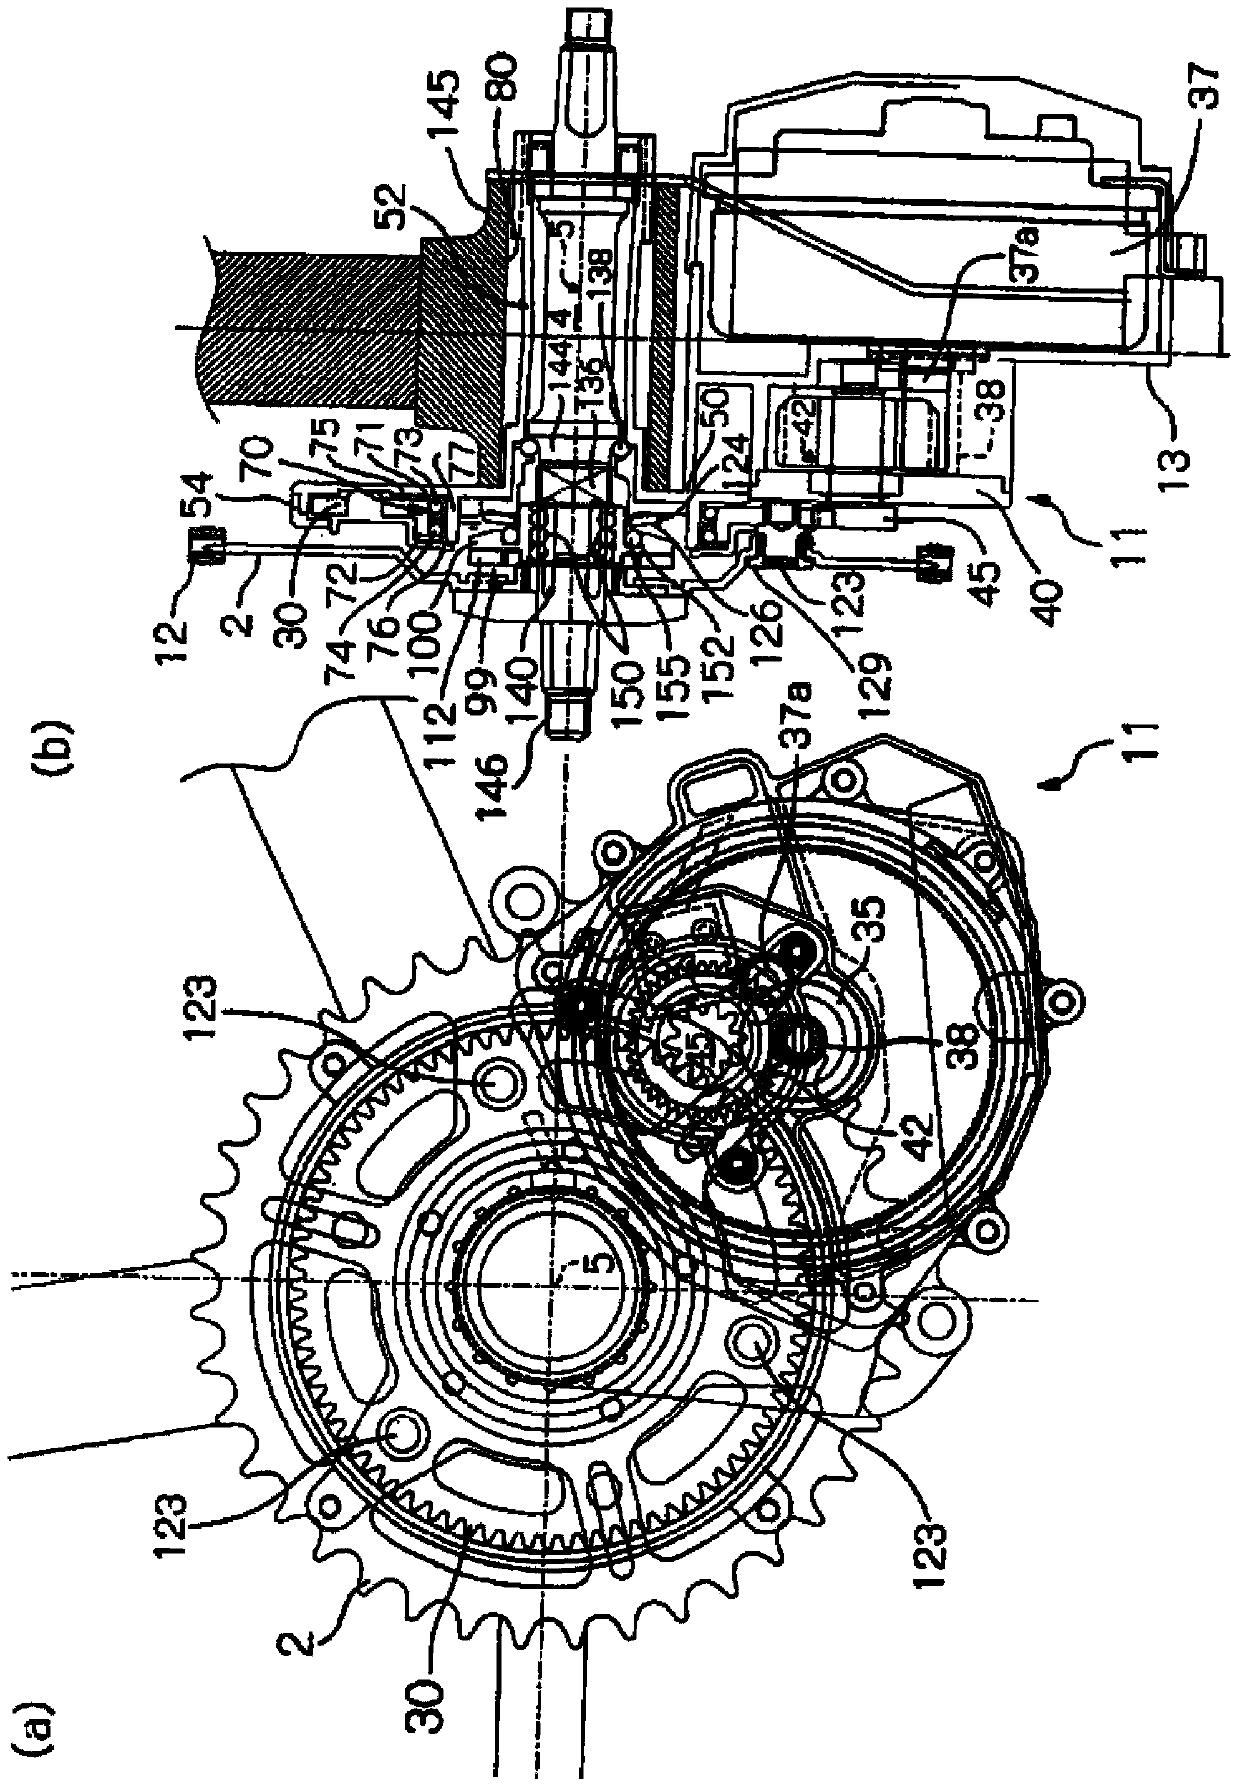 Assembly suitable for electric power assisted bicycle and capable of being mounted on bicycle frame